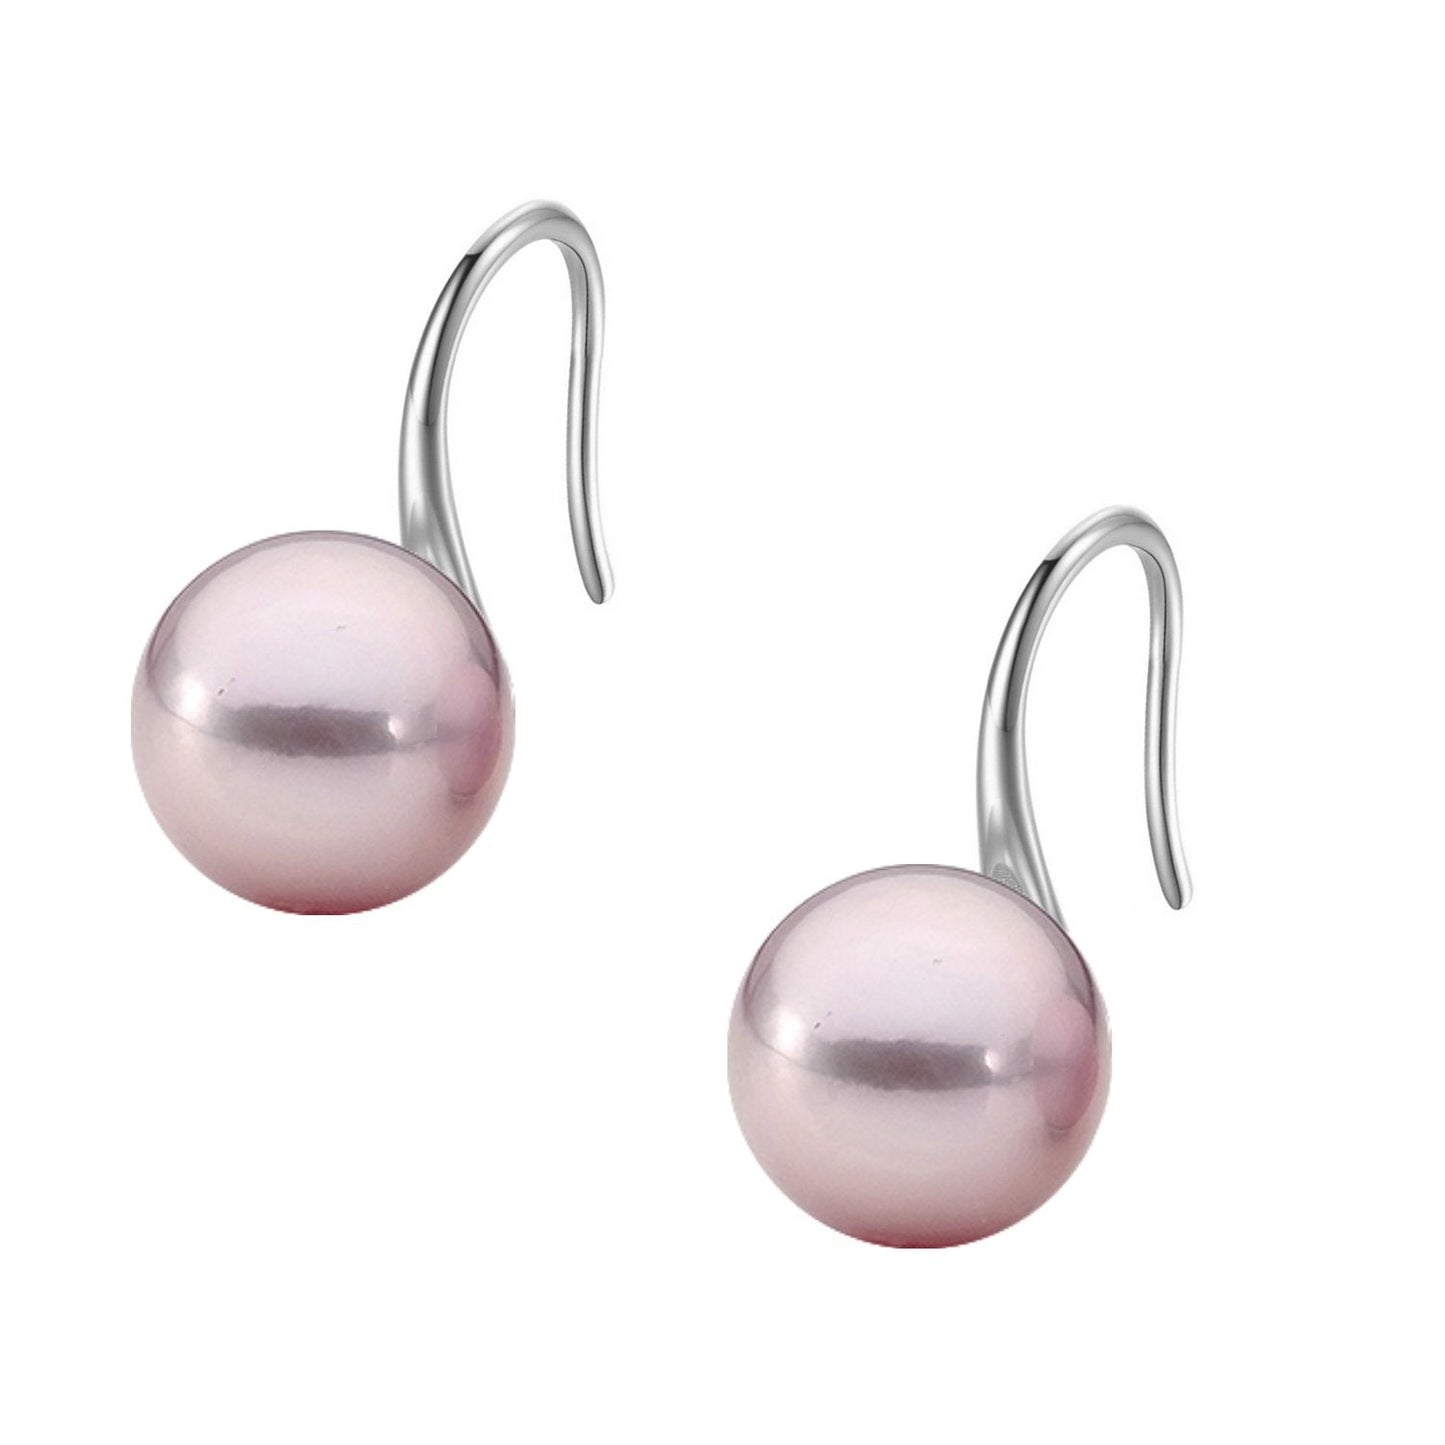 Pearl Rose Gold Stylish Round Earrings in Hook Design